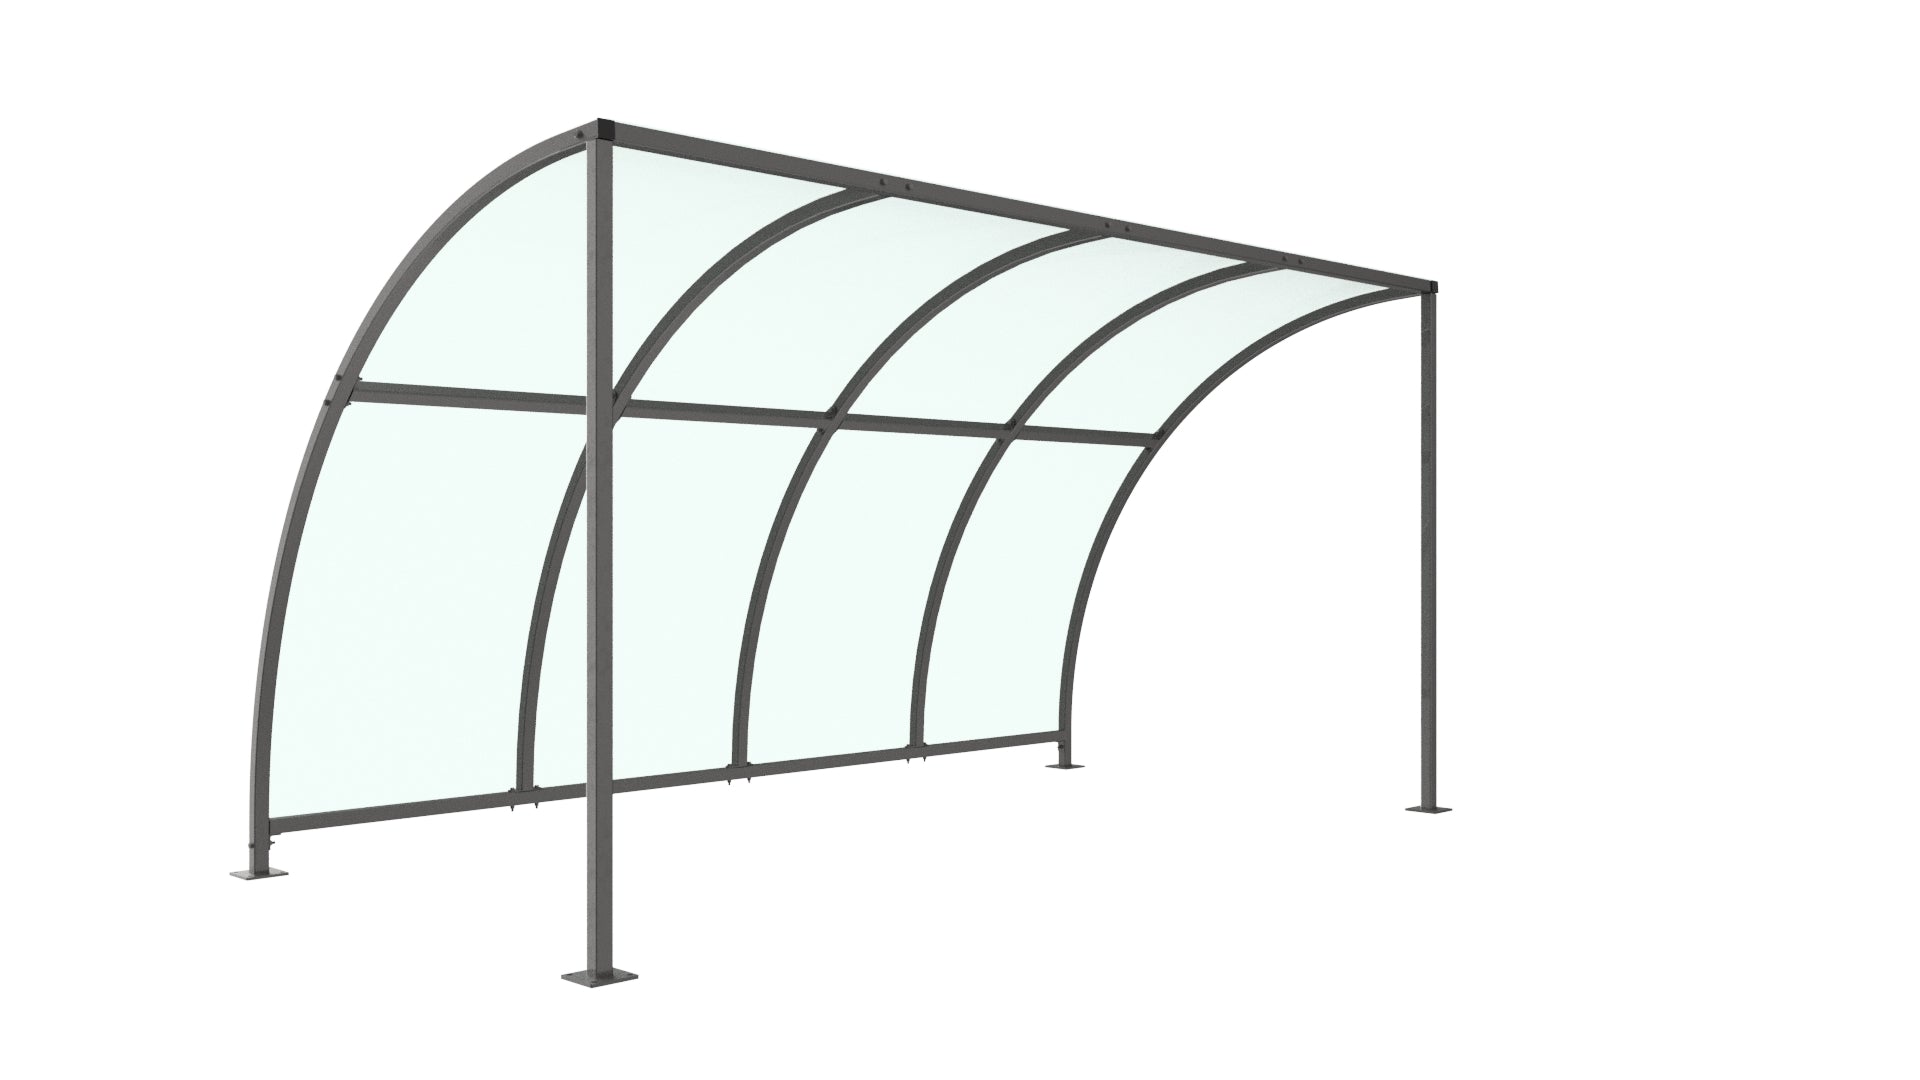 Leyton Cycle Shelter – Open Sided Galvanised Steel Frame